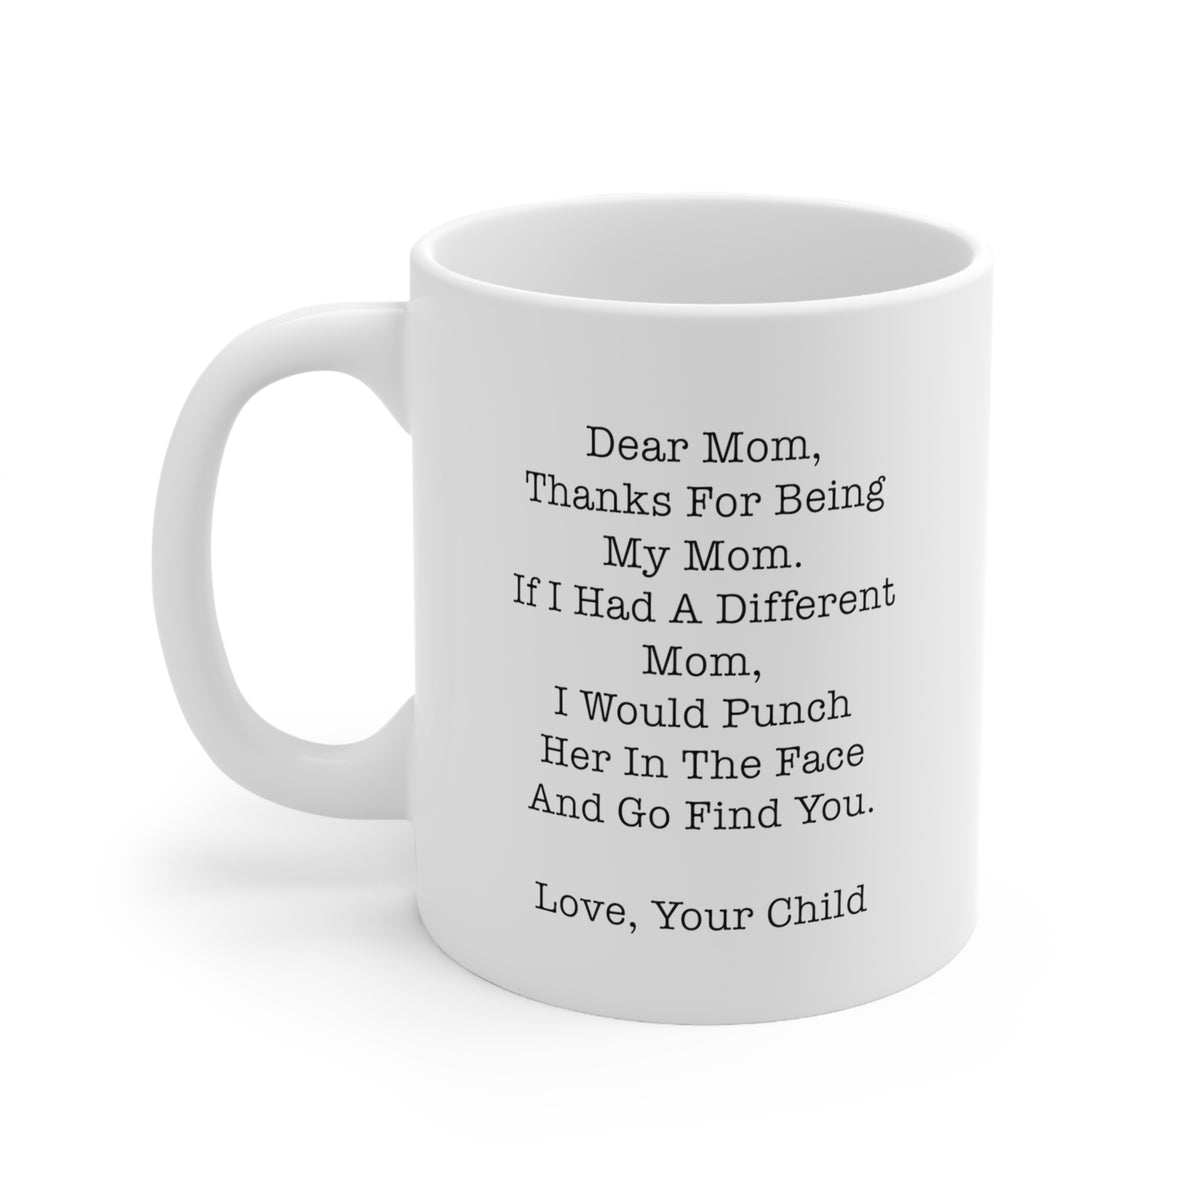 Mom Coffee Mug, Dear Mom, Thanks For Being My Mom. If I Had A Different Mother, I Would Punch Her In The Face And Go Find You. Love, Your Child, Funny Mothers Day For Mommy From Son Daughter